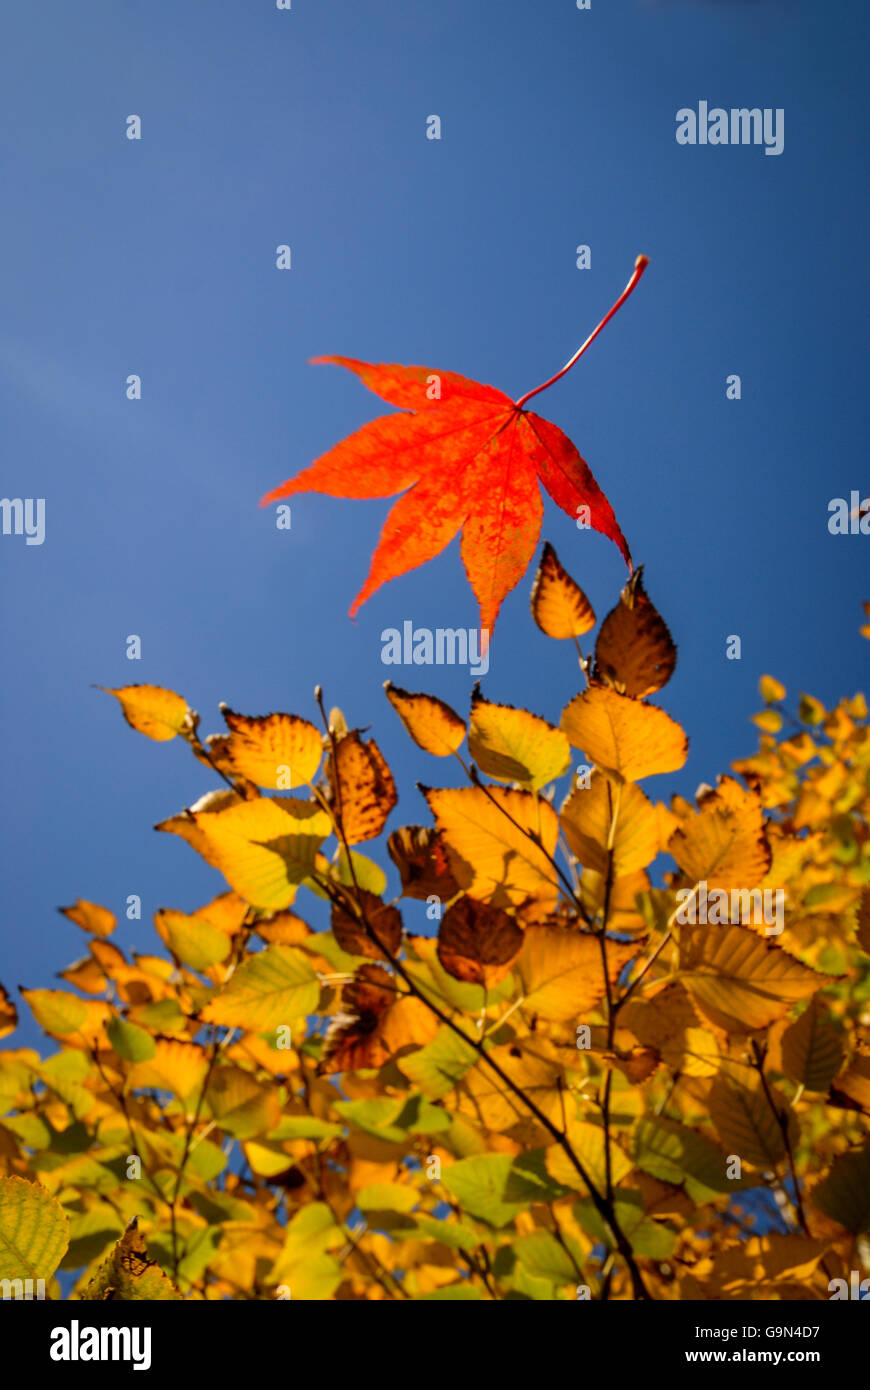 An Acer leaf falls past a Betula Costata tree at the start of autumn / fall. Stock Photo